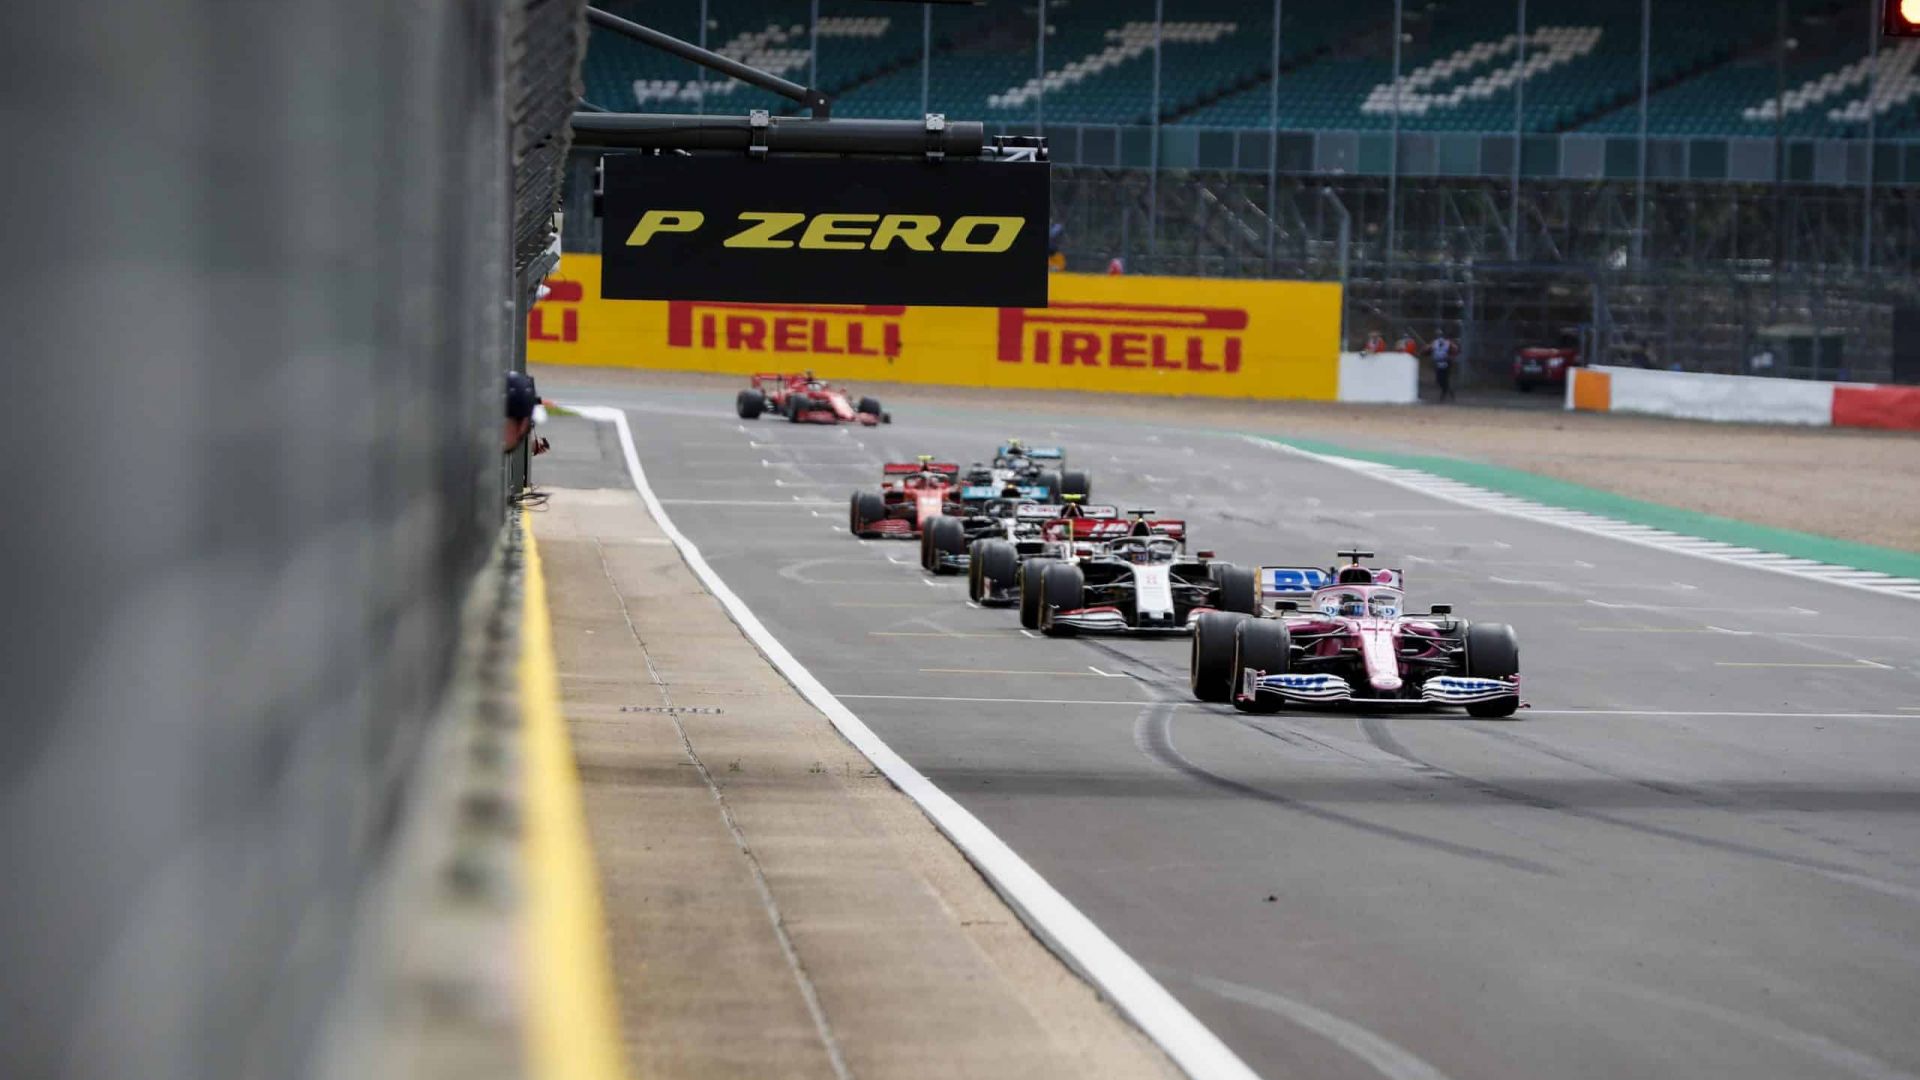 SILVERSTONE, UNITED KINGDOM - JULY 31: Nico Hulkenberg, Racing Point RP20, Romain Grosjean, Haas VF-20, and others practice their start procedures during the British GP at Silverstone on Friday July 31, 2020 in Northamptonshire, United Kingdom. (Photo by Steven Tee / LAT Images)